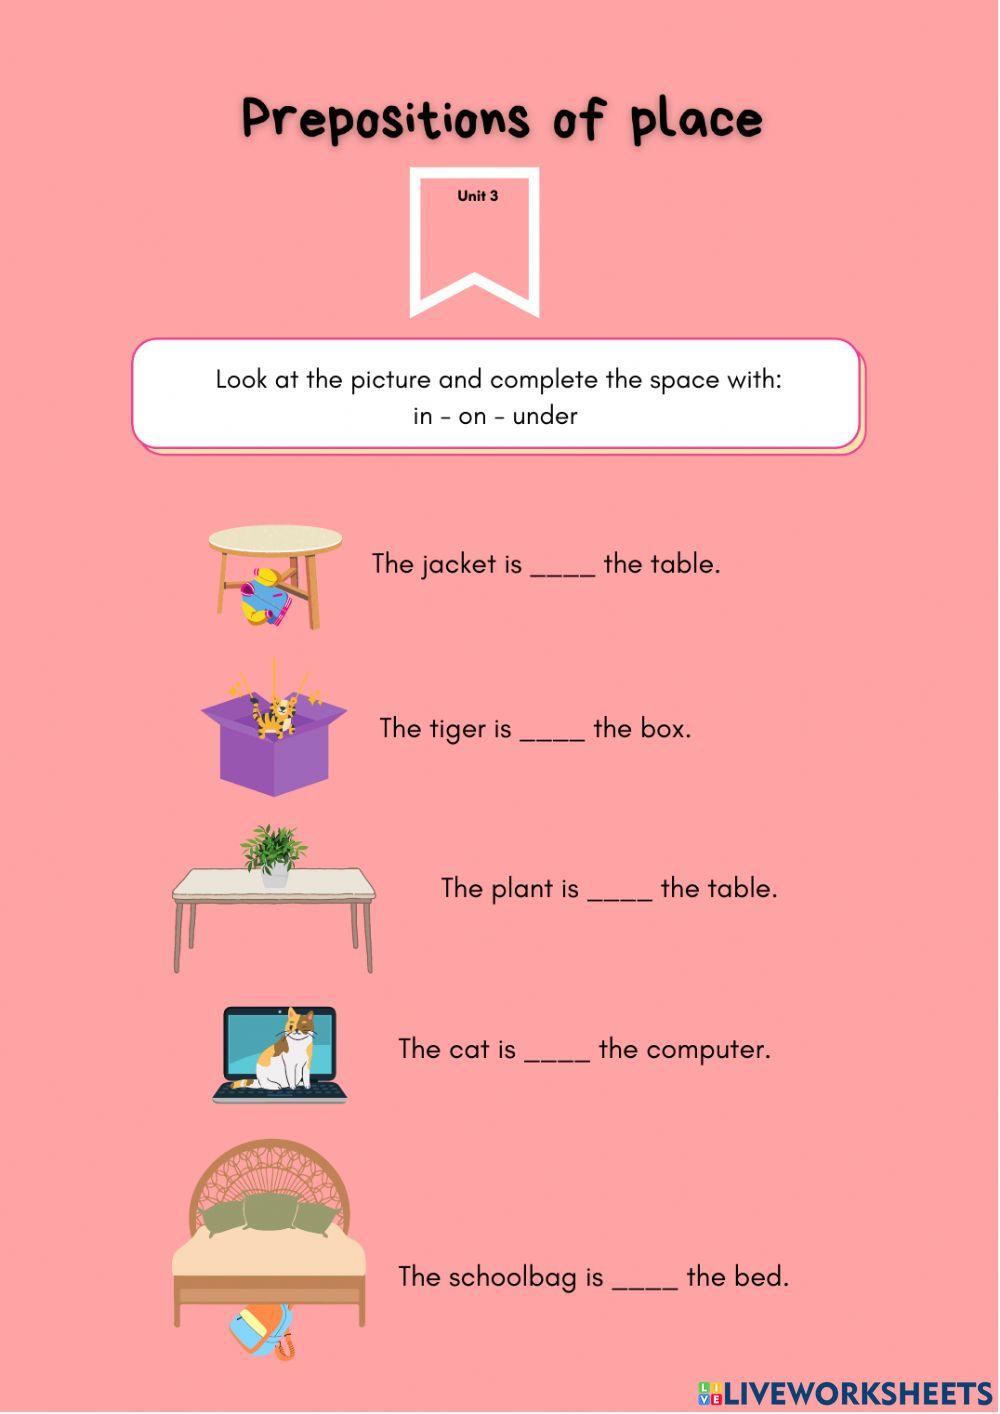 Prepositions of place in, on and under